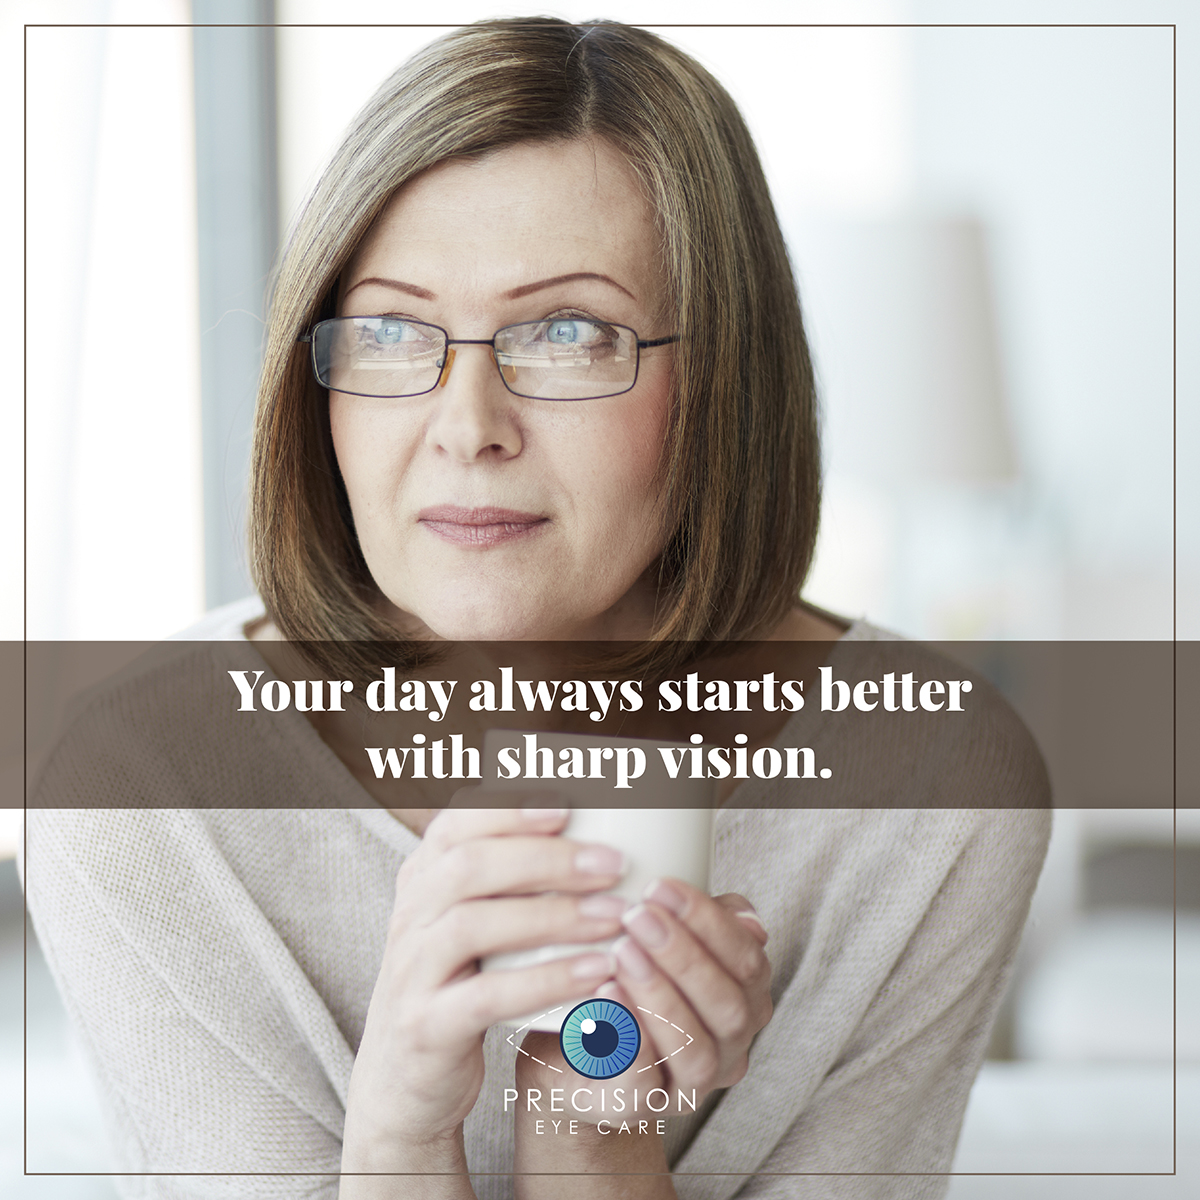 Your day always starts better with sharp vision.